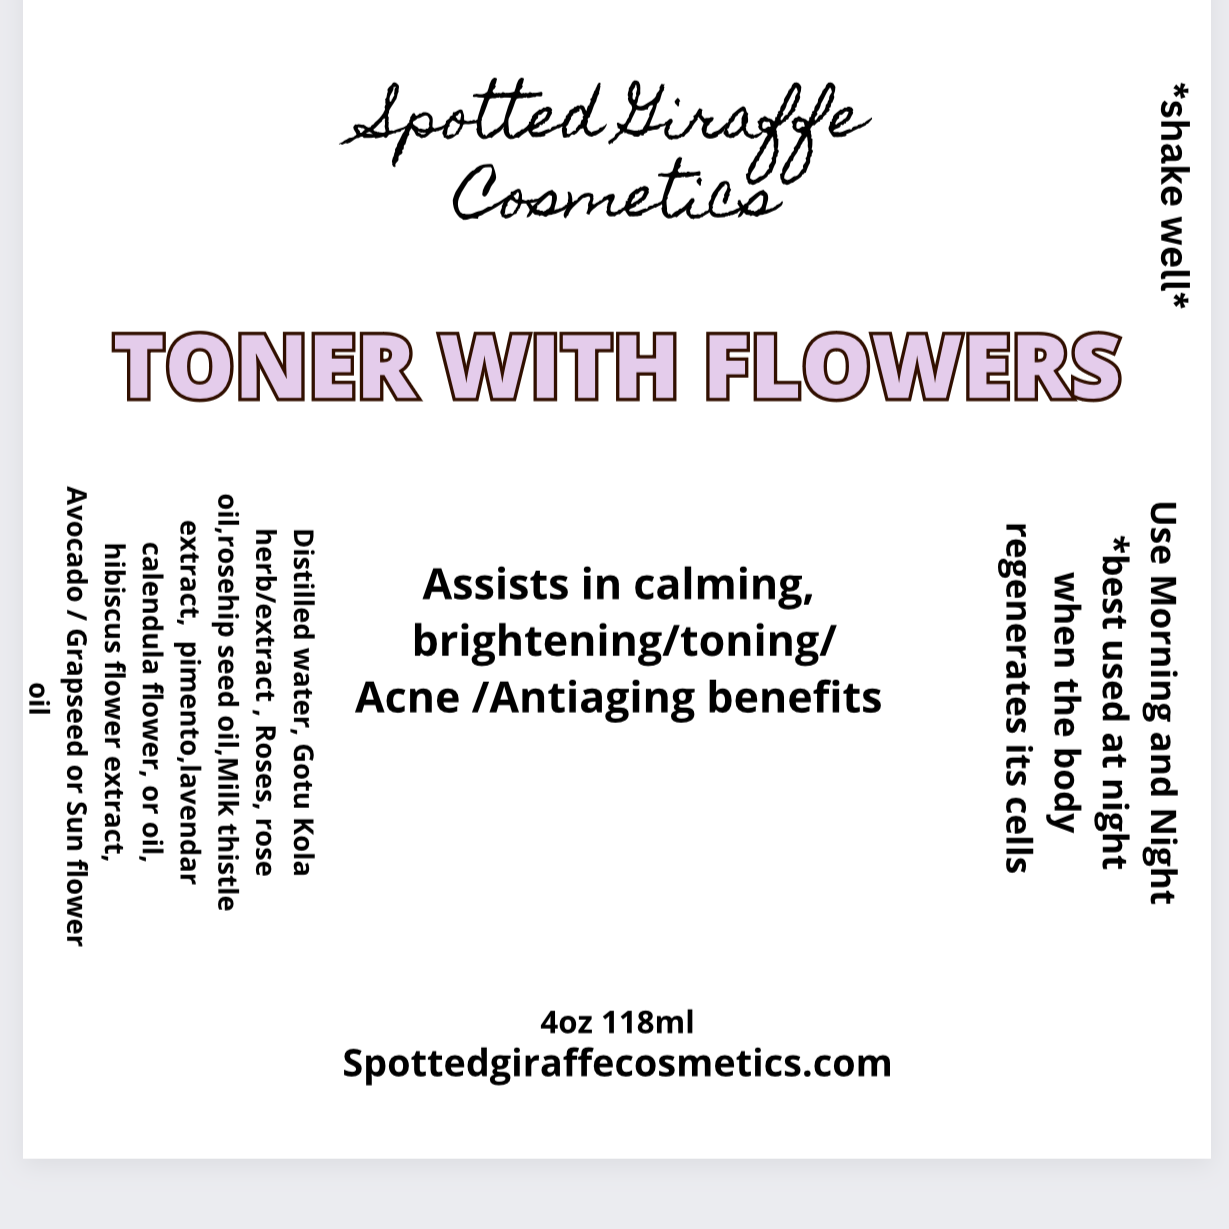 Toner with Flowers